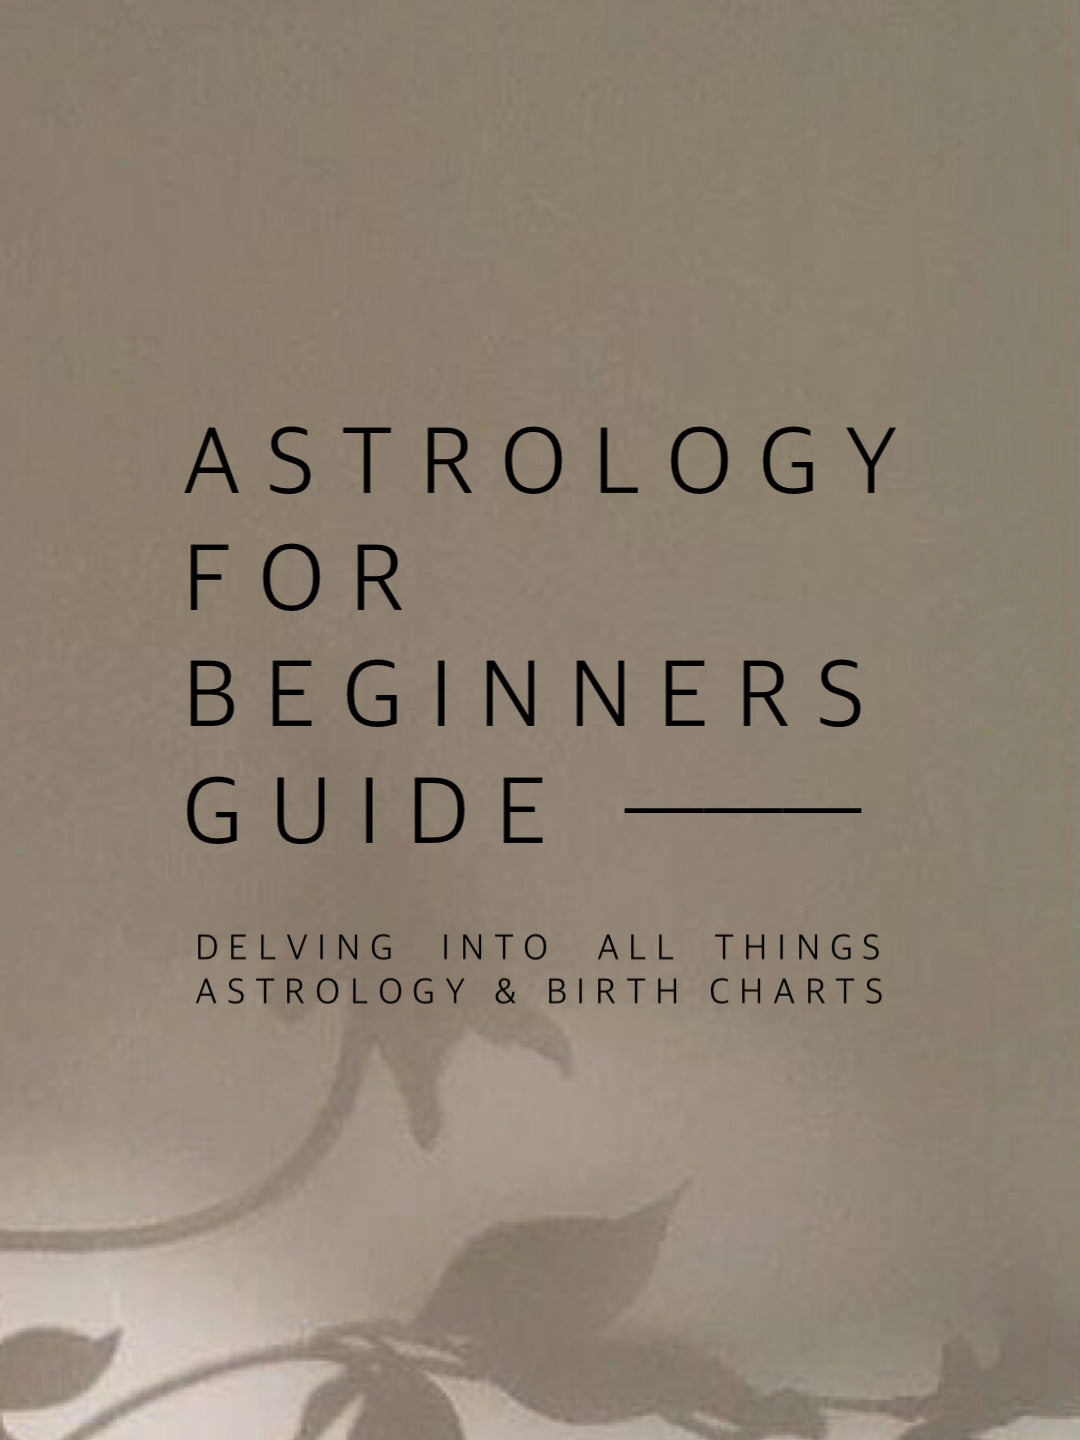 ASTROLOGY GUIDE FOR BEGINNERS